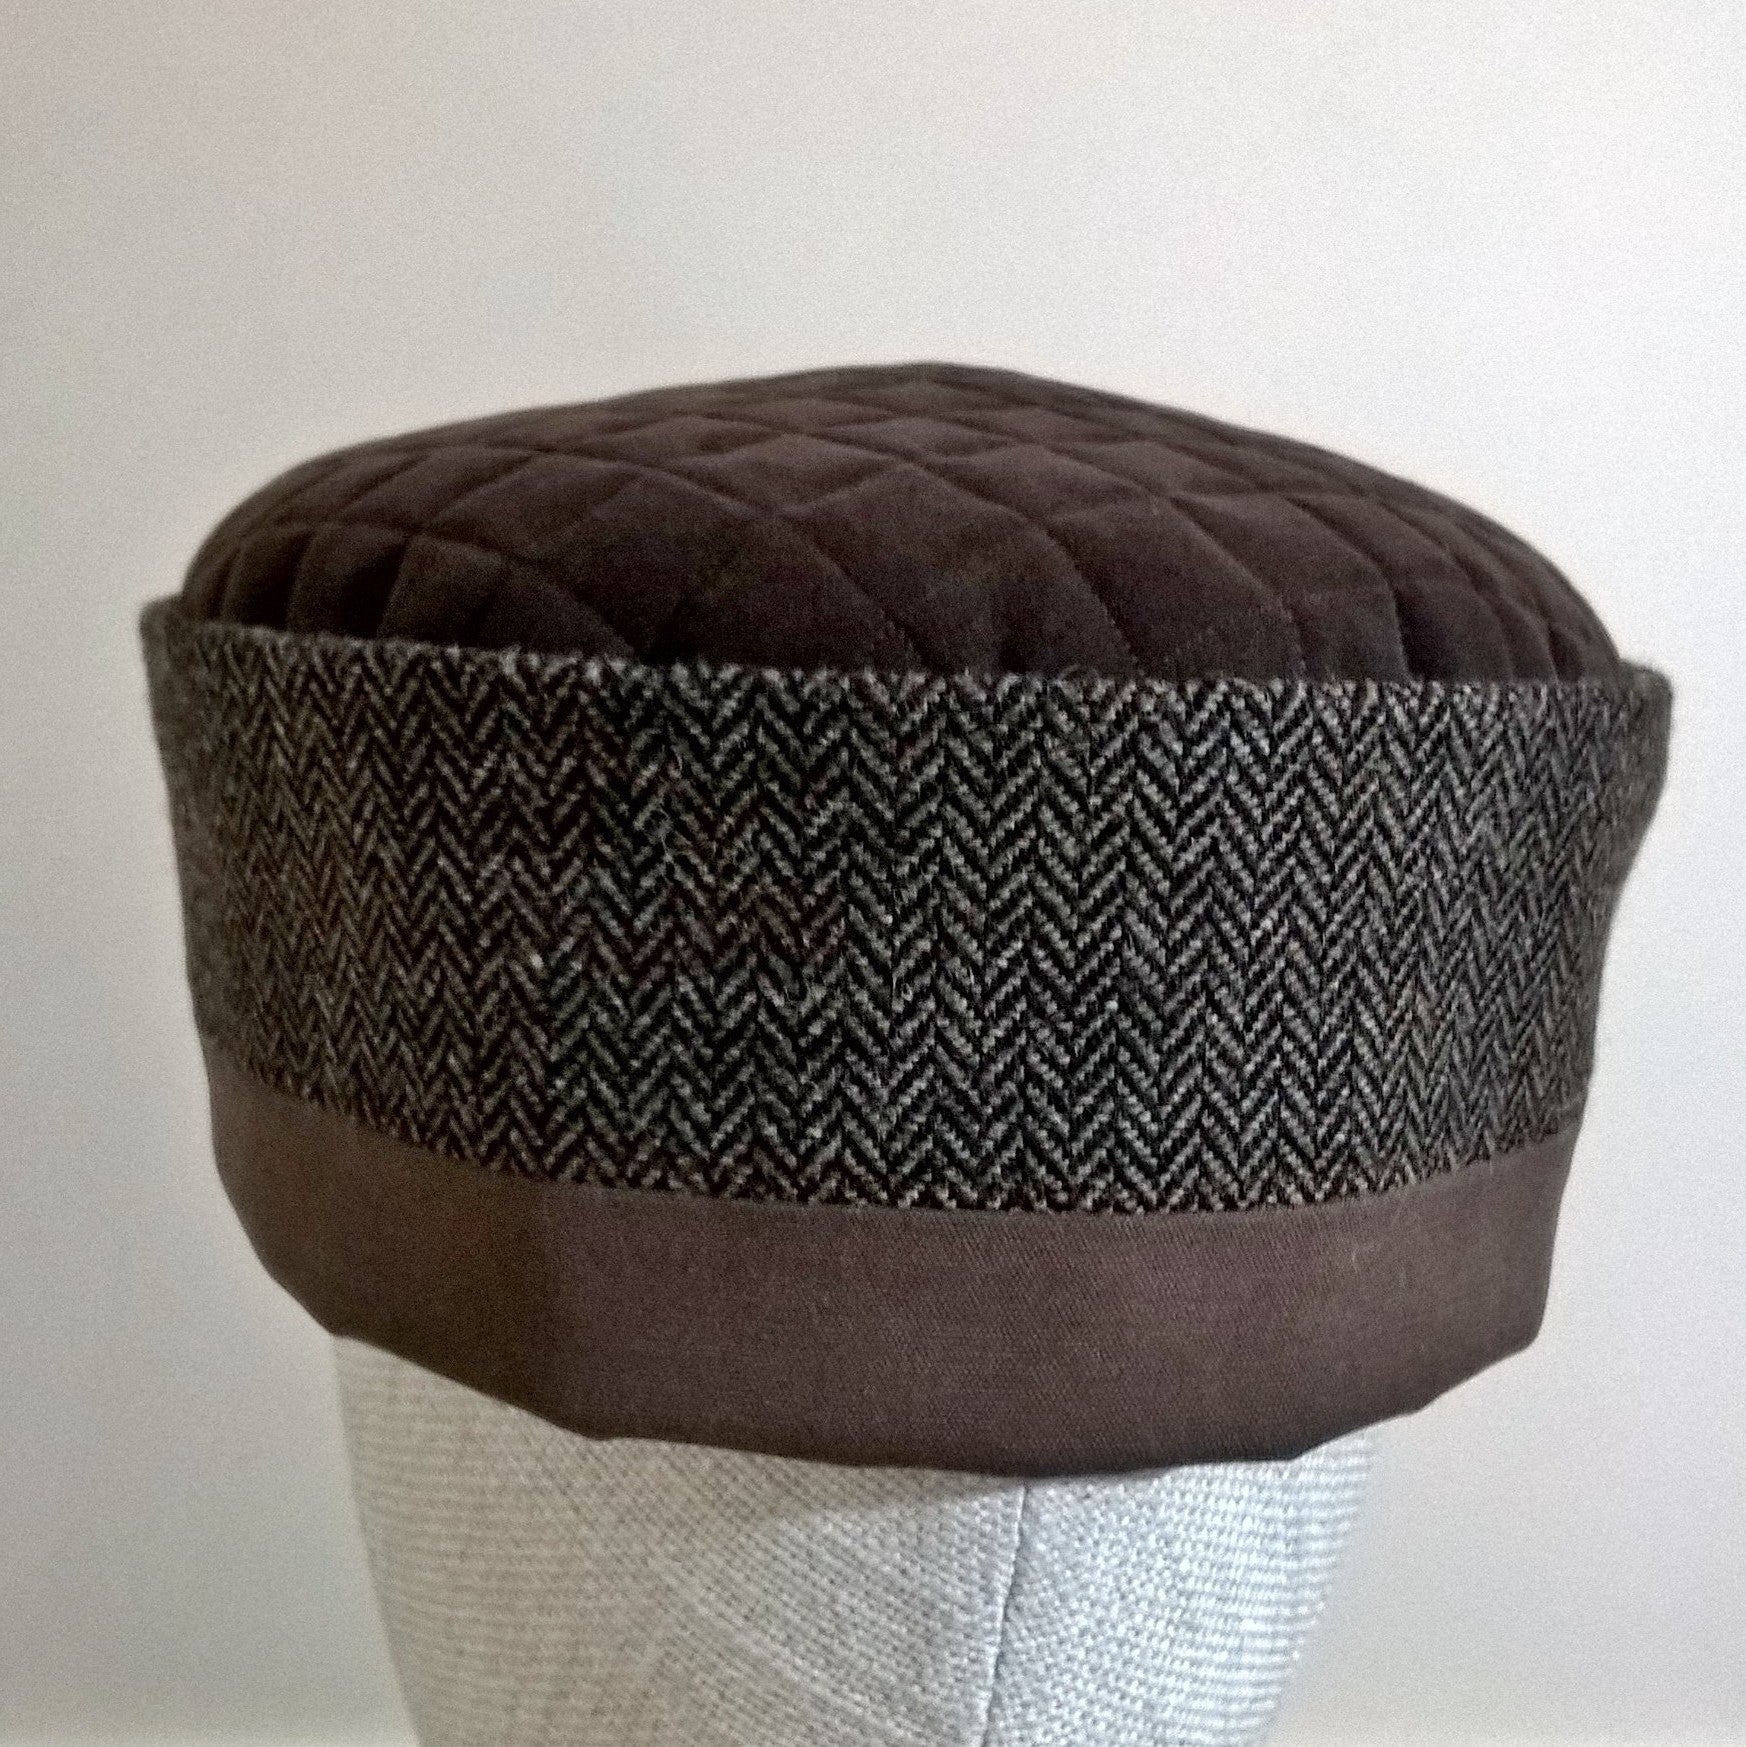 The pillbox hat has a quilted tip and herringbone wool crown